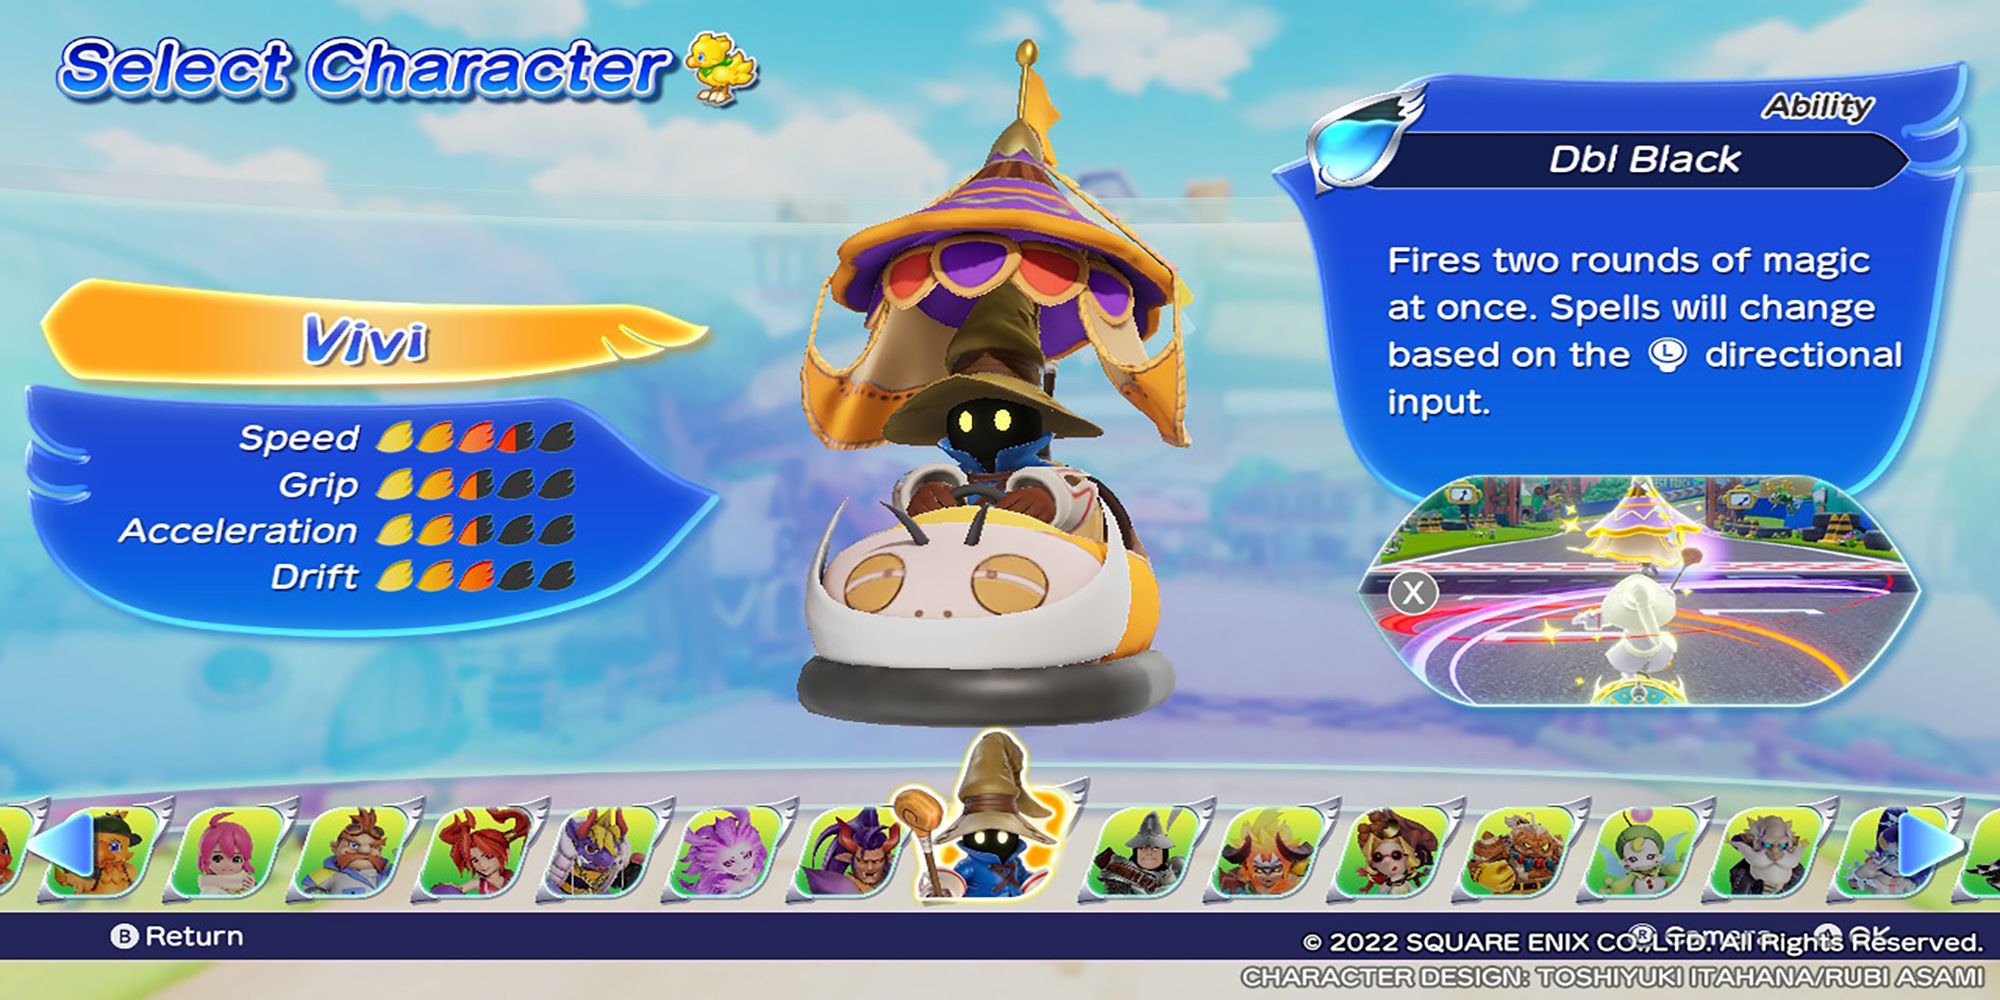 Vivi's character model, along with his stats and abilities, in the Select Character menu. Chocobo GP.